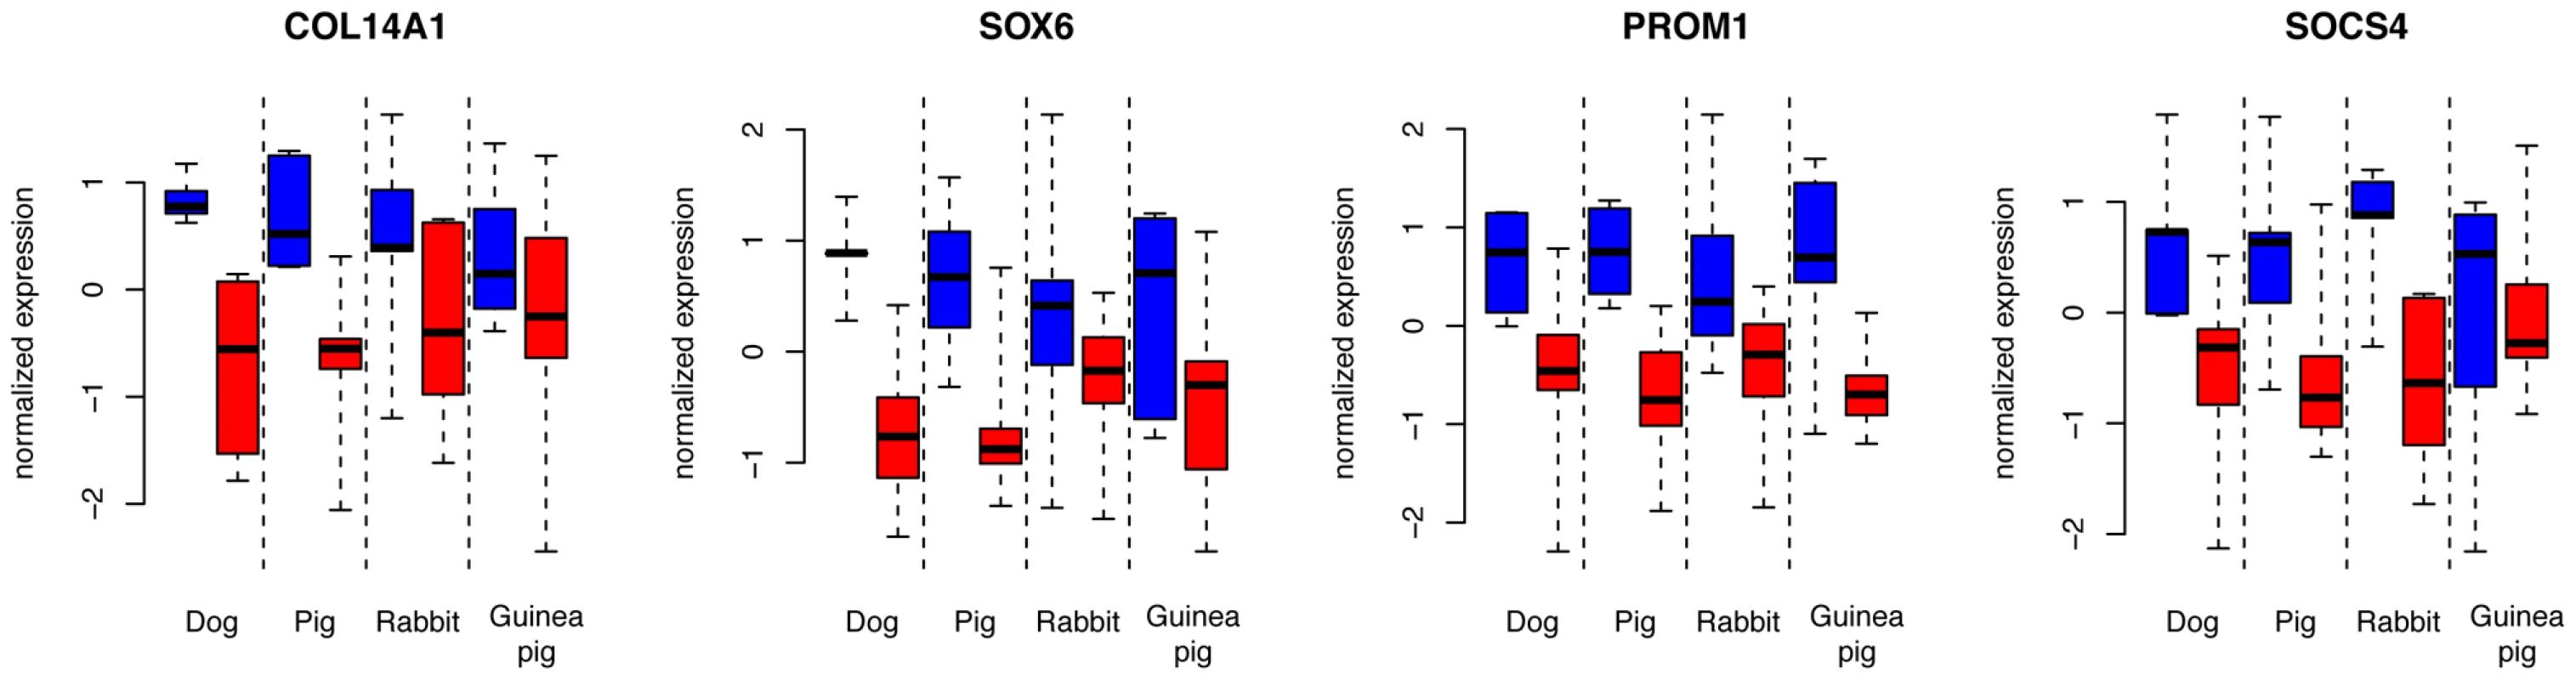 Expression levels of four genes with common expression in domesticated dogs, pigs, rabbits, and guinea pigs.